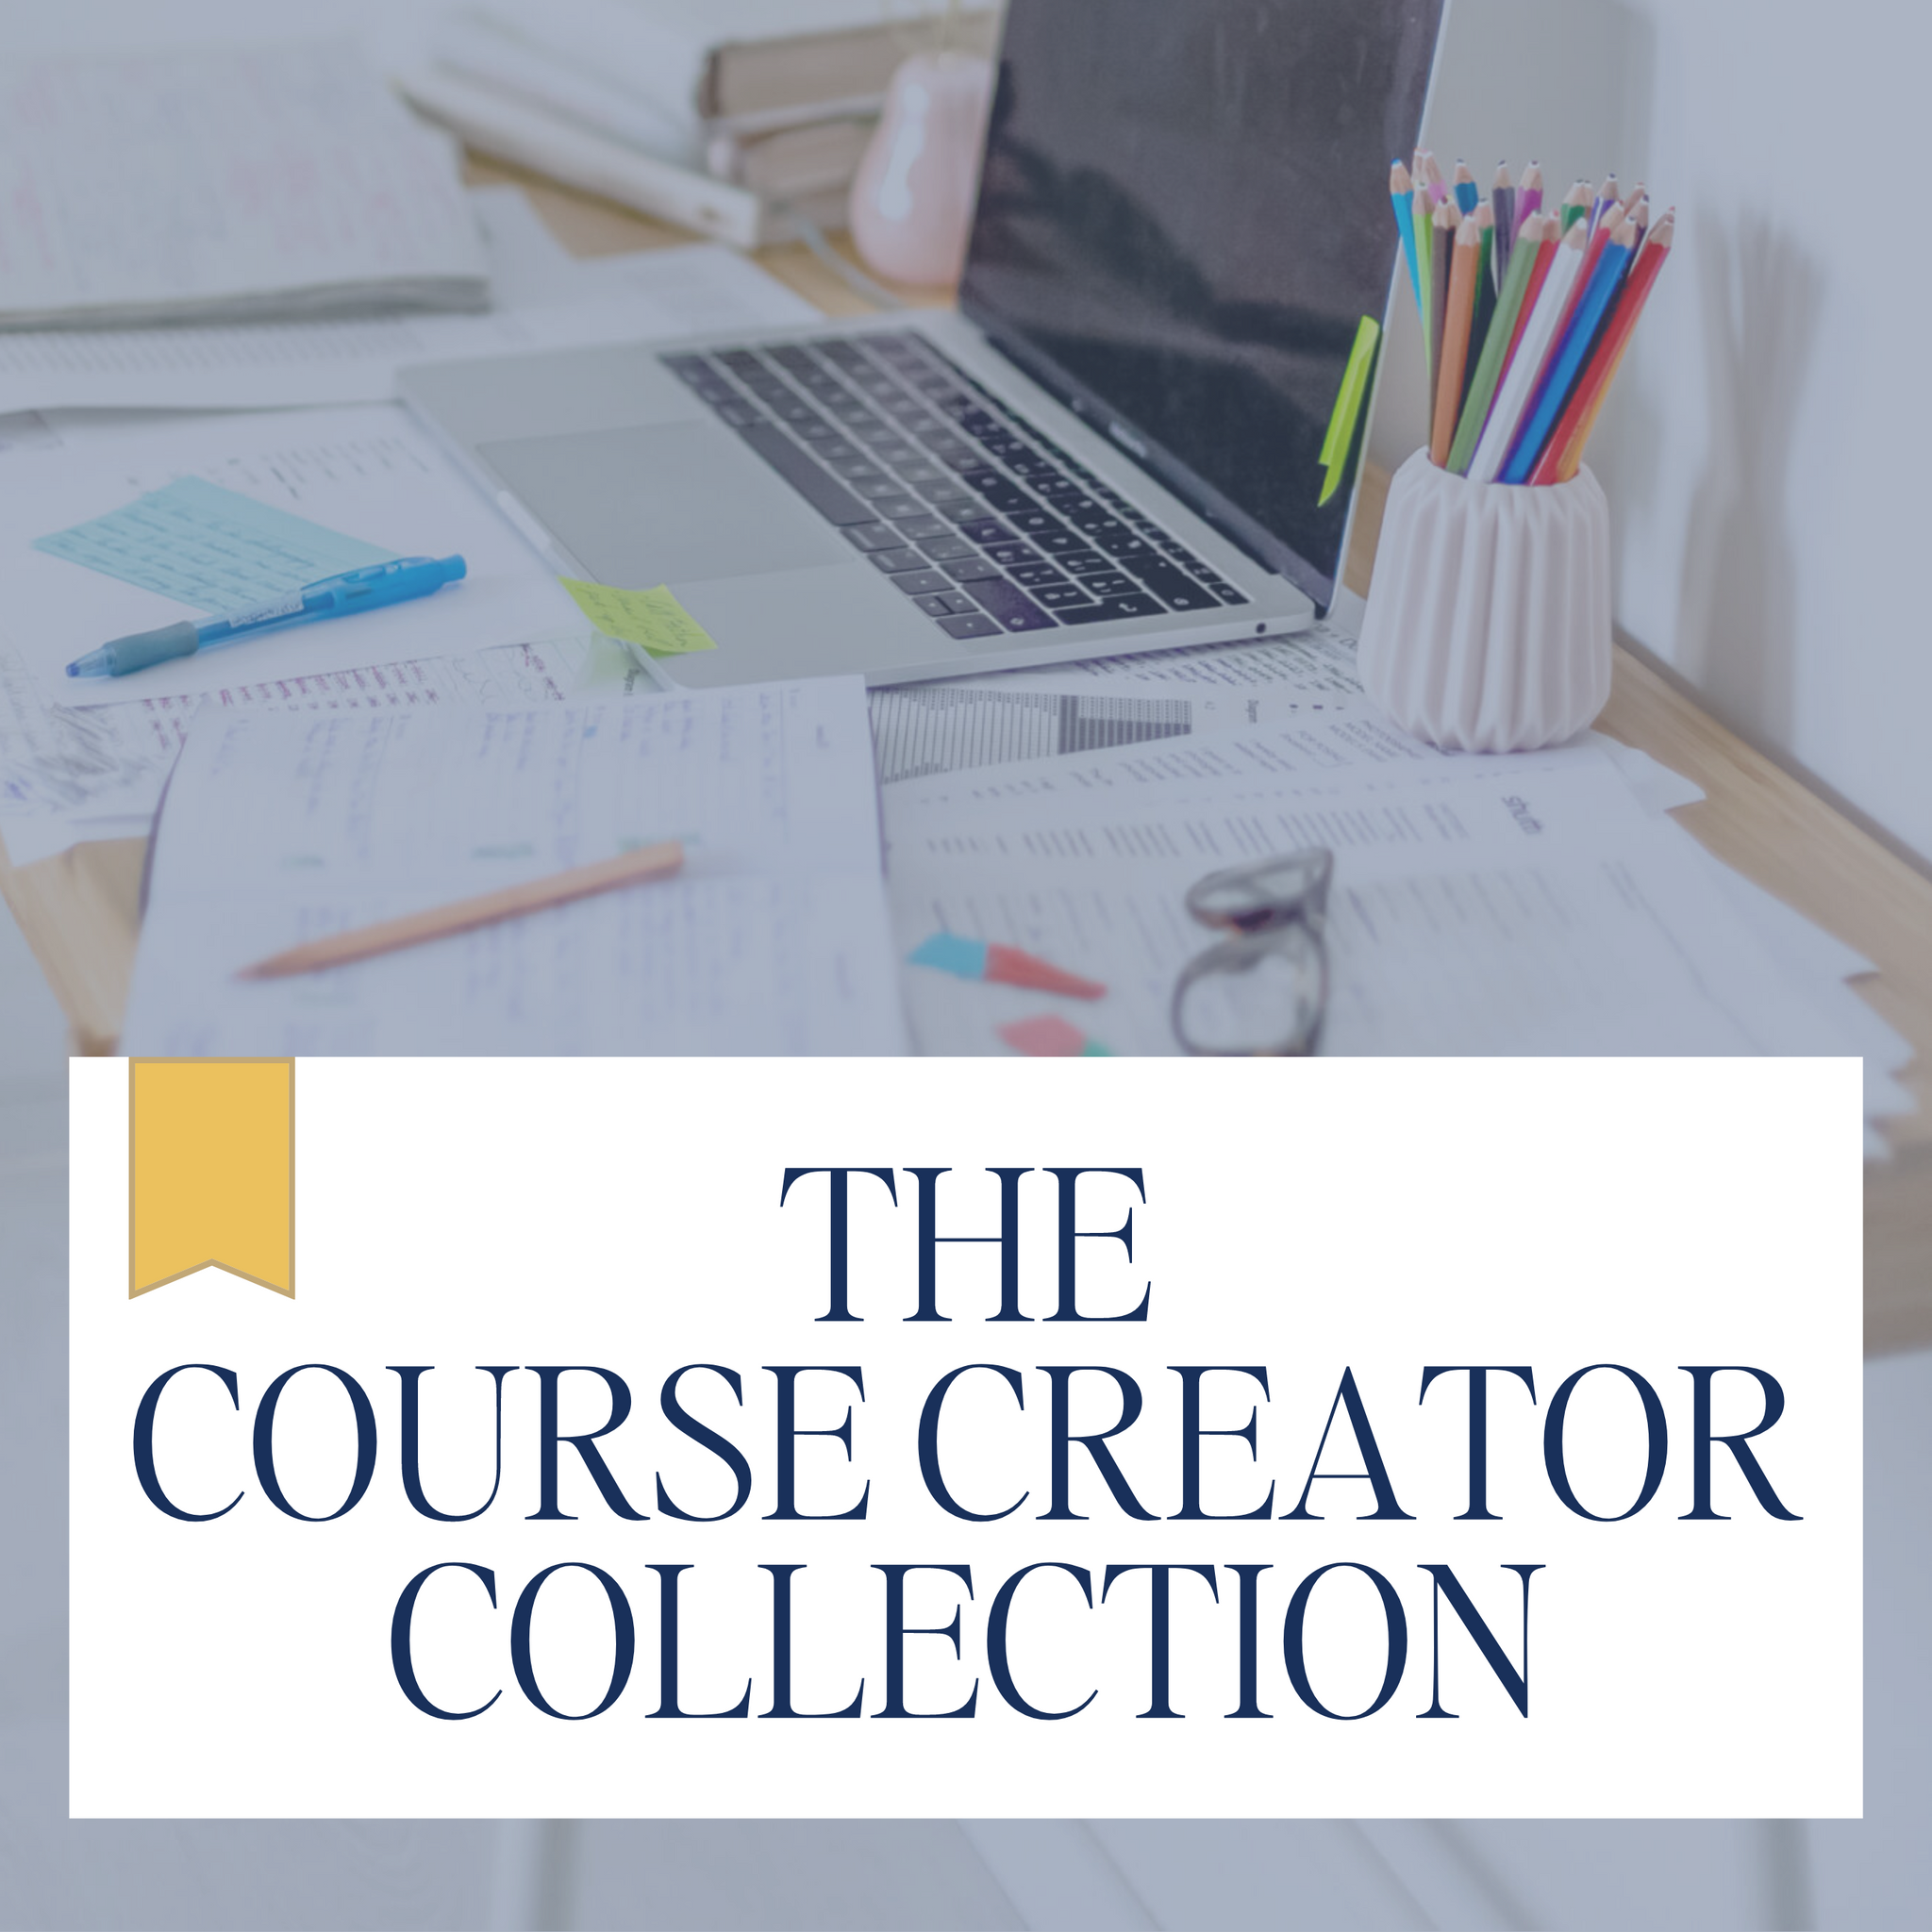 The Course Creator Collection